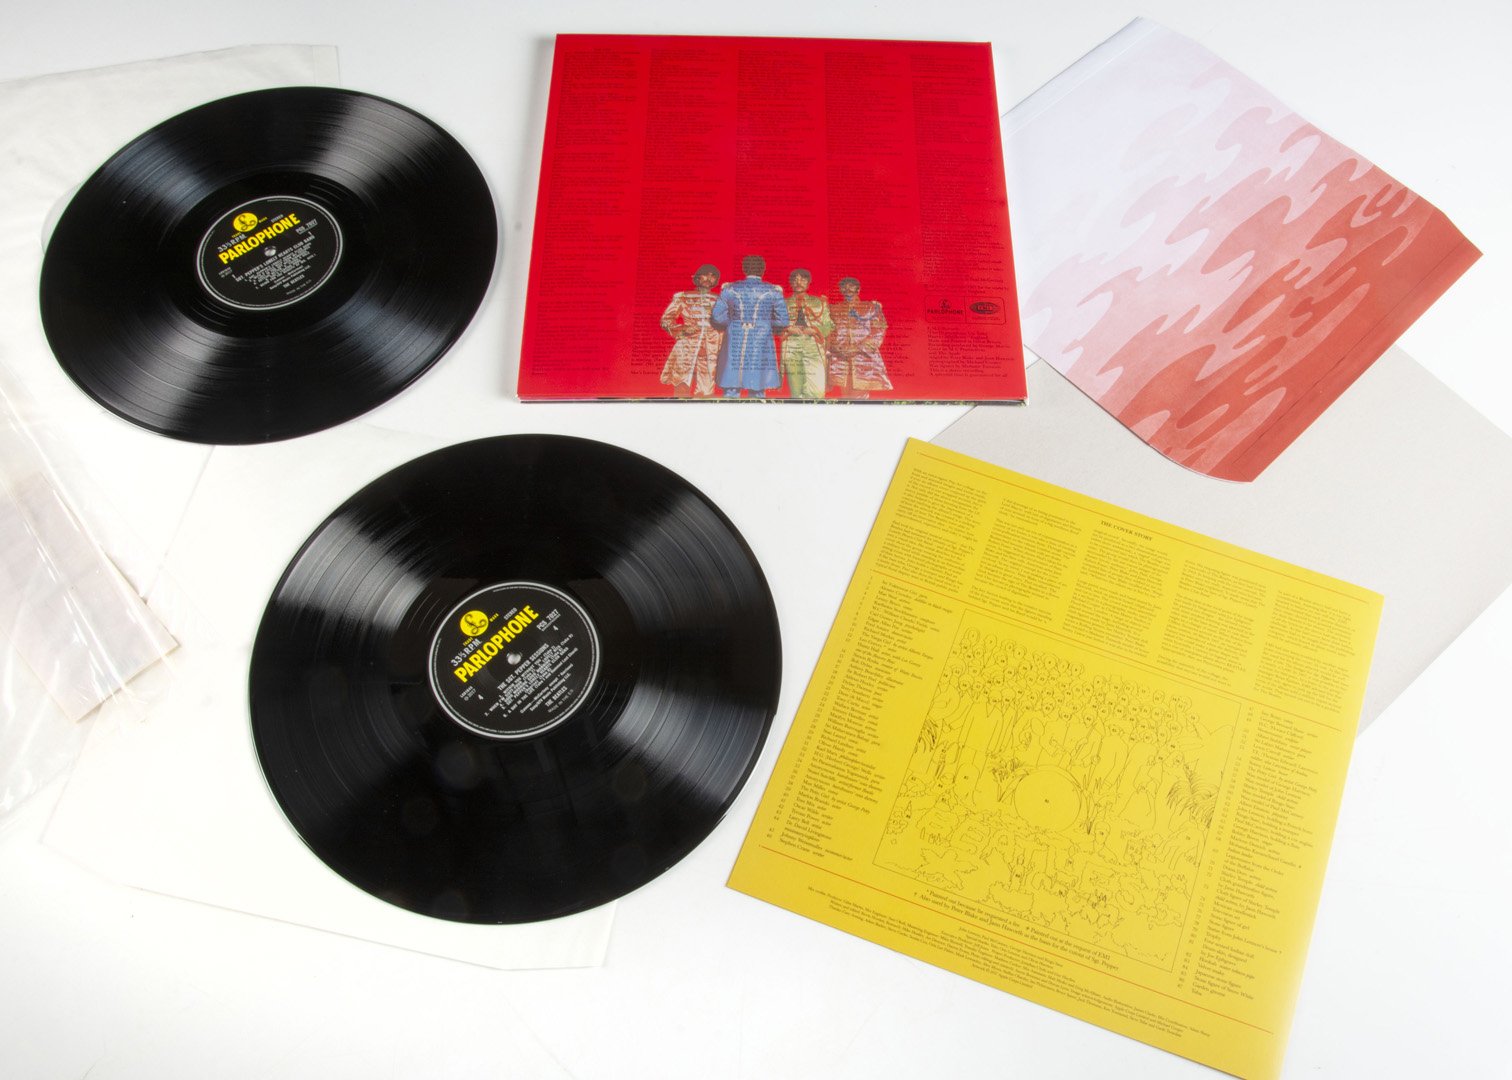 The Beatles LP, Sgt Pepper - 50th Anniversary Double Album released 2017 on Apple (60255745534) - - Image 2 of 2